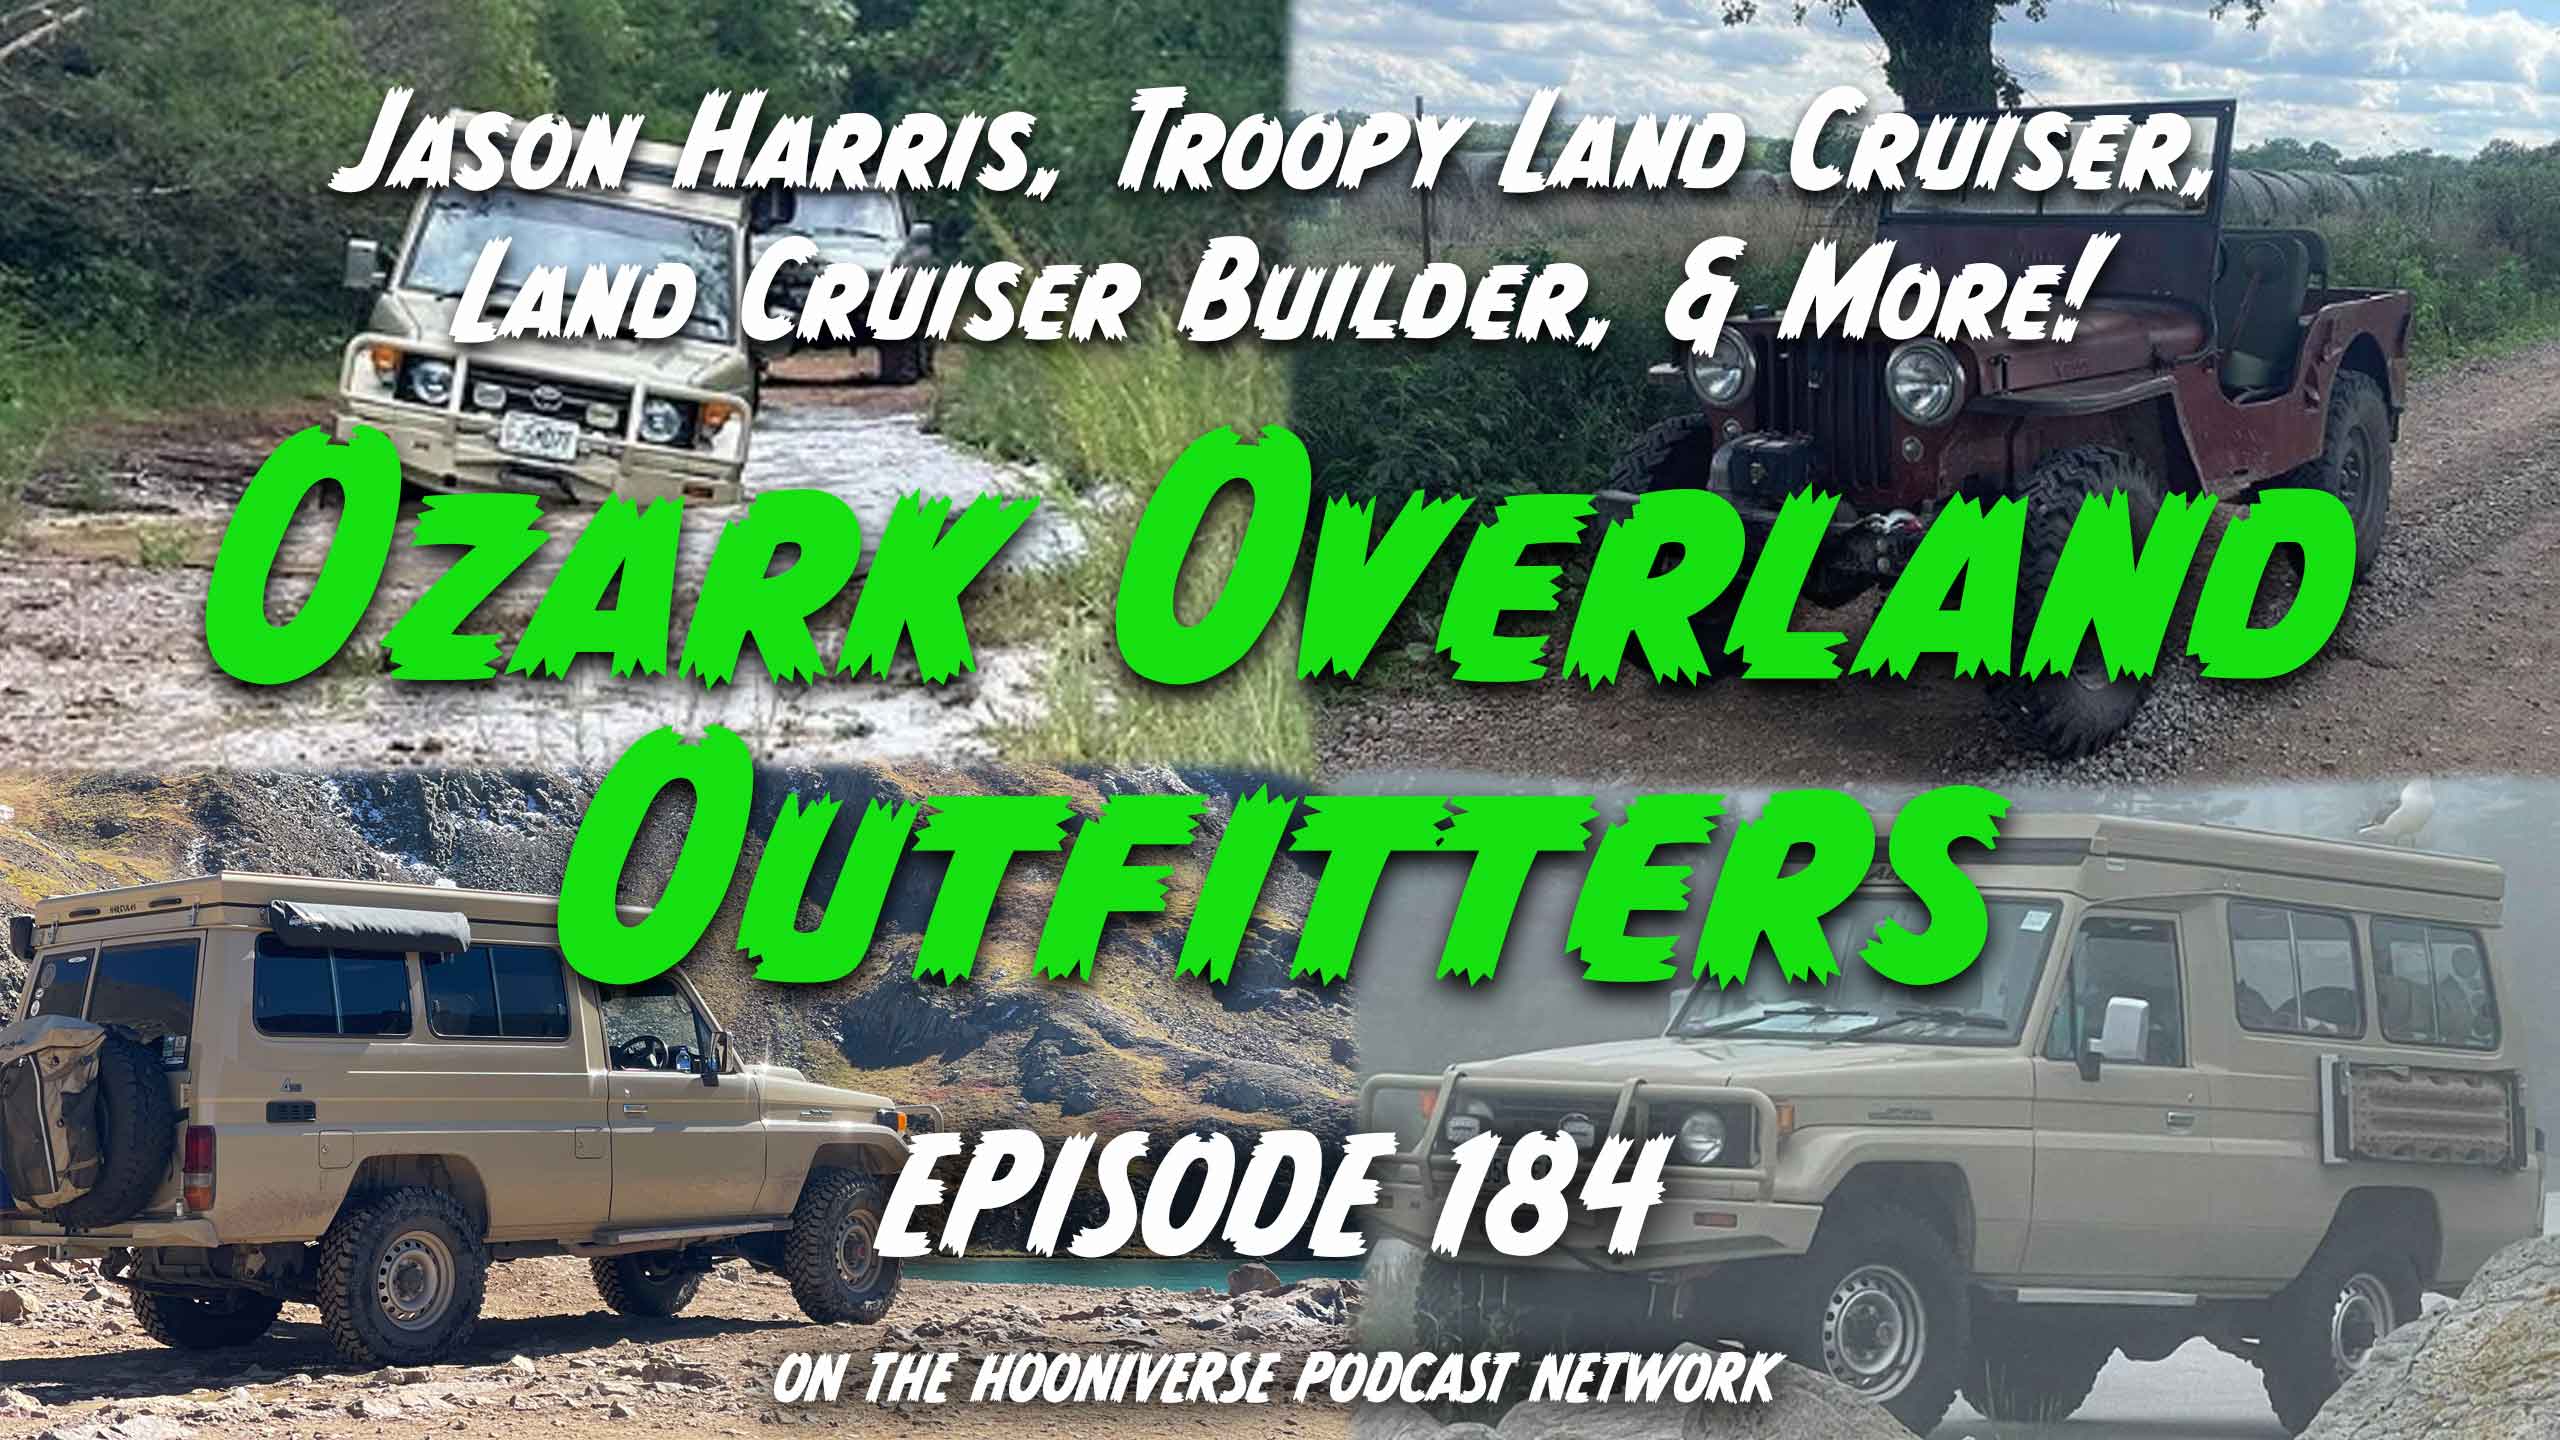 Jason-Harris-Ozark-Overland-Outfitters-Troopy-Off-The-Road-Again-Podcast-Episode-184